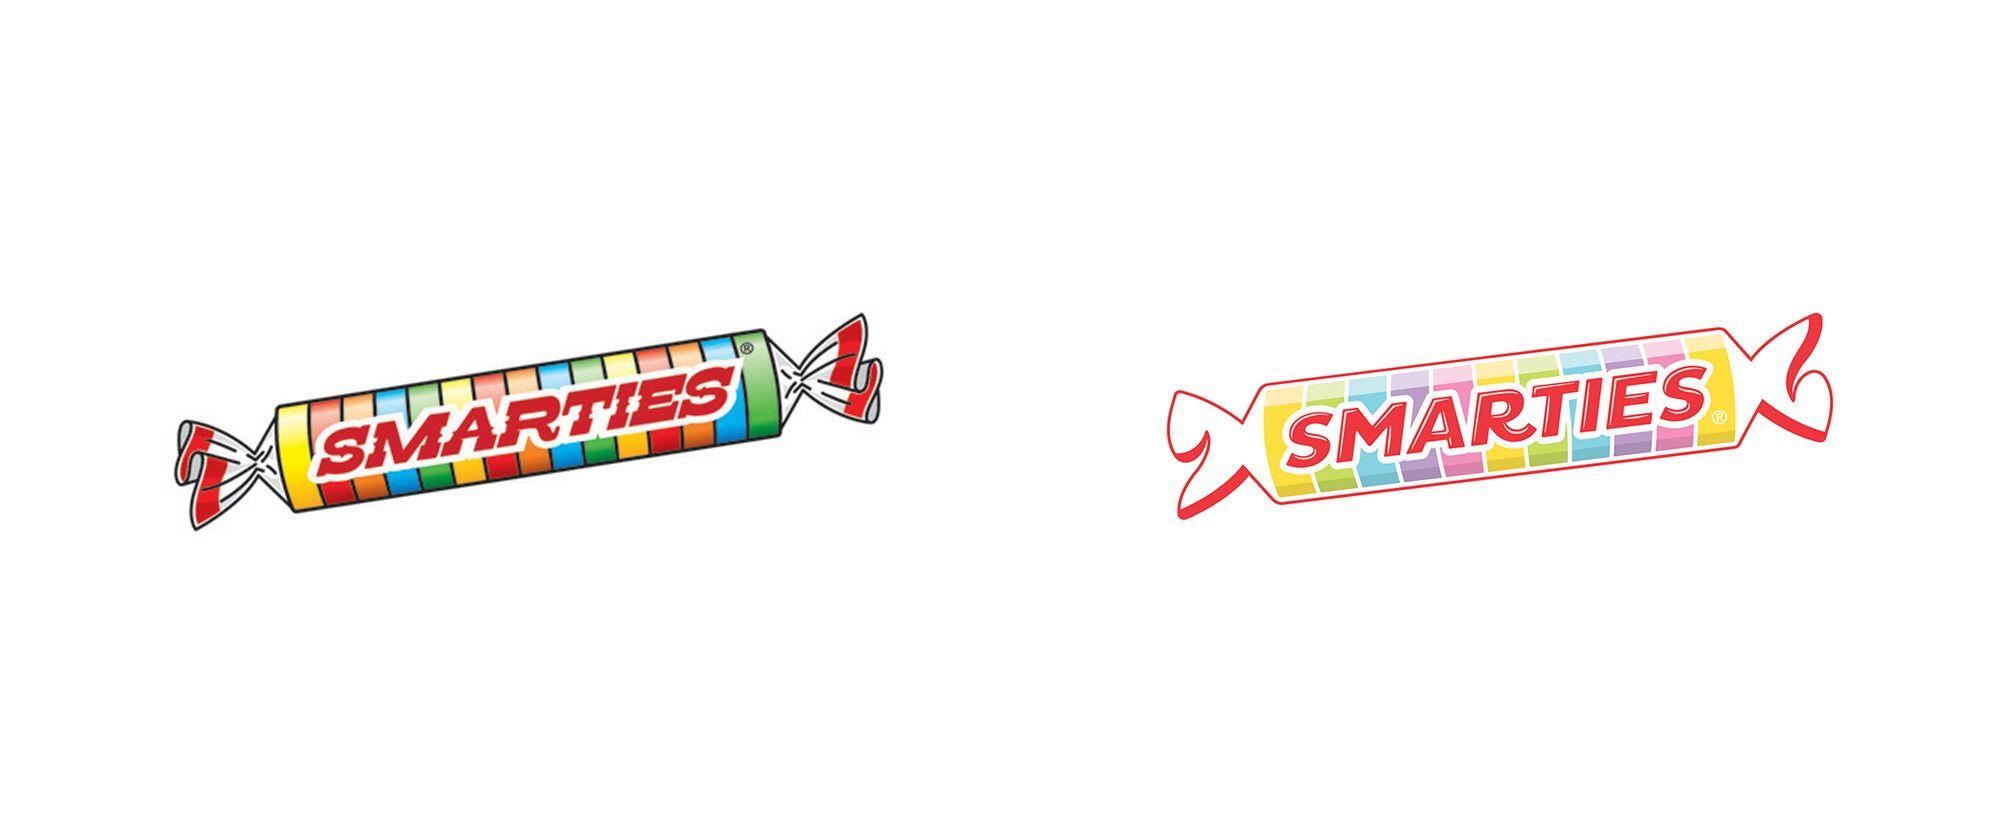 Smarties Logo - Brand New: New Logo and Packaging for Smarties by Pearlfisher